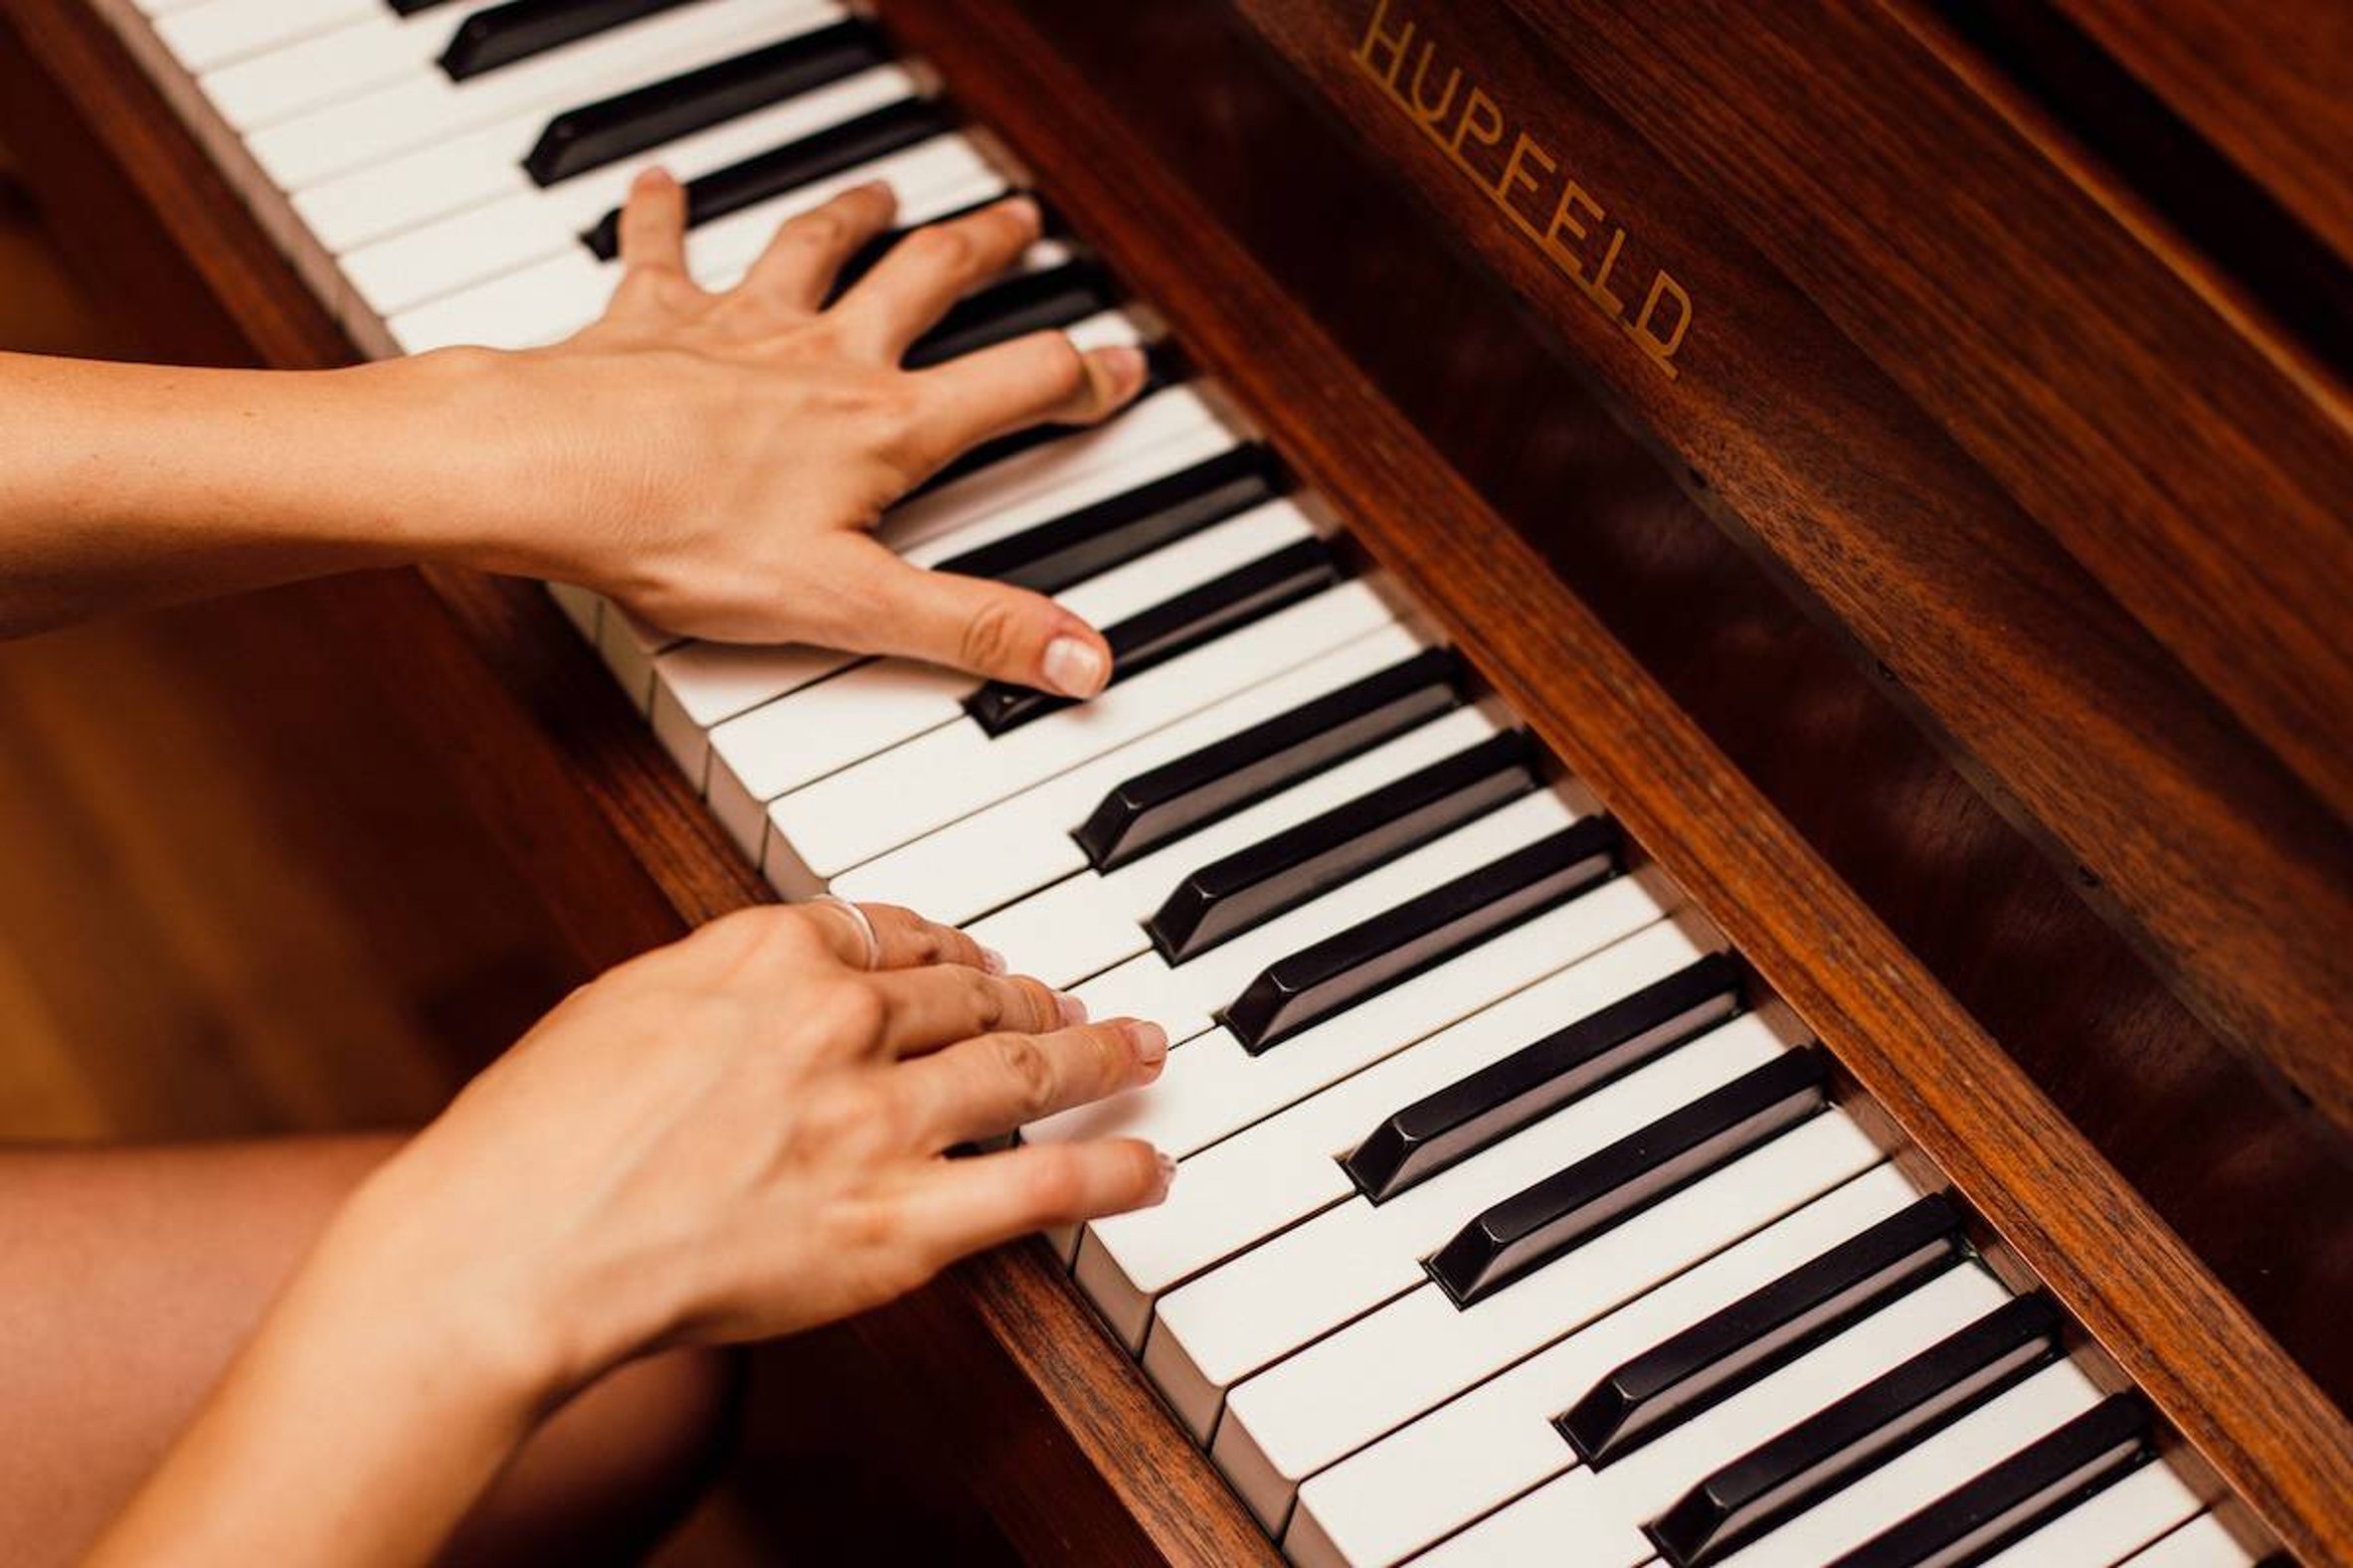 Pianist of Any Skill Level for Piano Class On-line